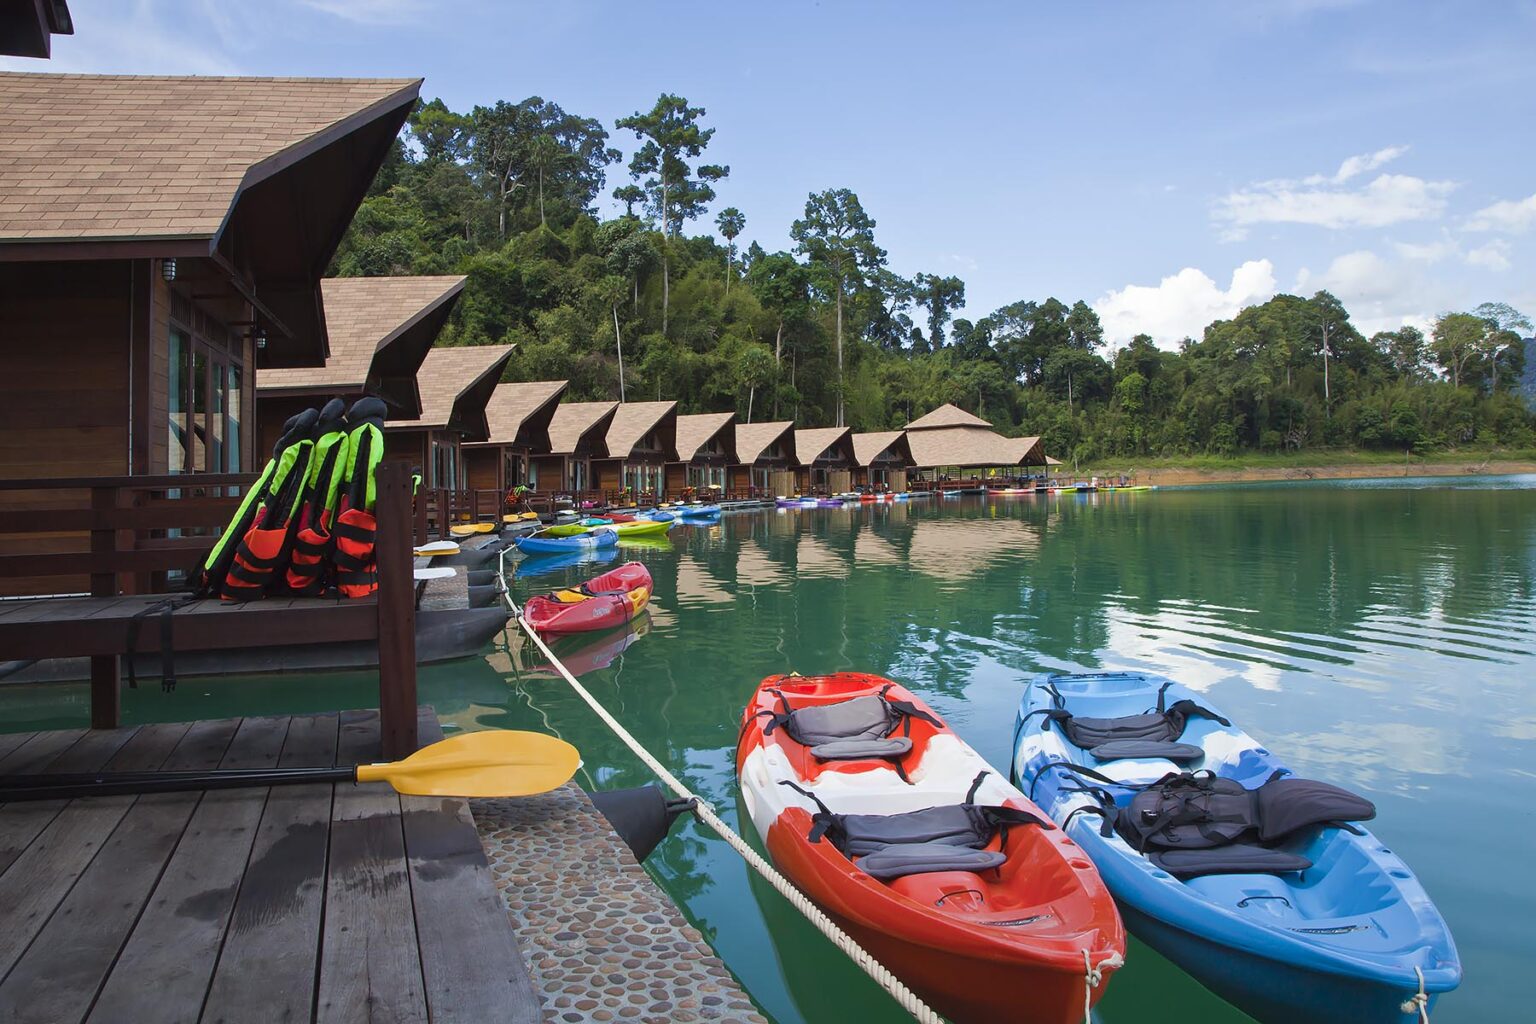 High end FLOATING BUNGALOS on CHIEW LAN RESERVOIR which was created by the Ratchaprapa dam in the heart of KHAO SOK NATIONAL PARK - SURATHANI PROVENCE, THAILAND